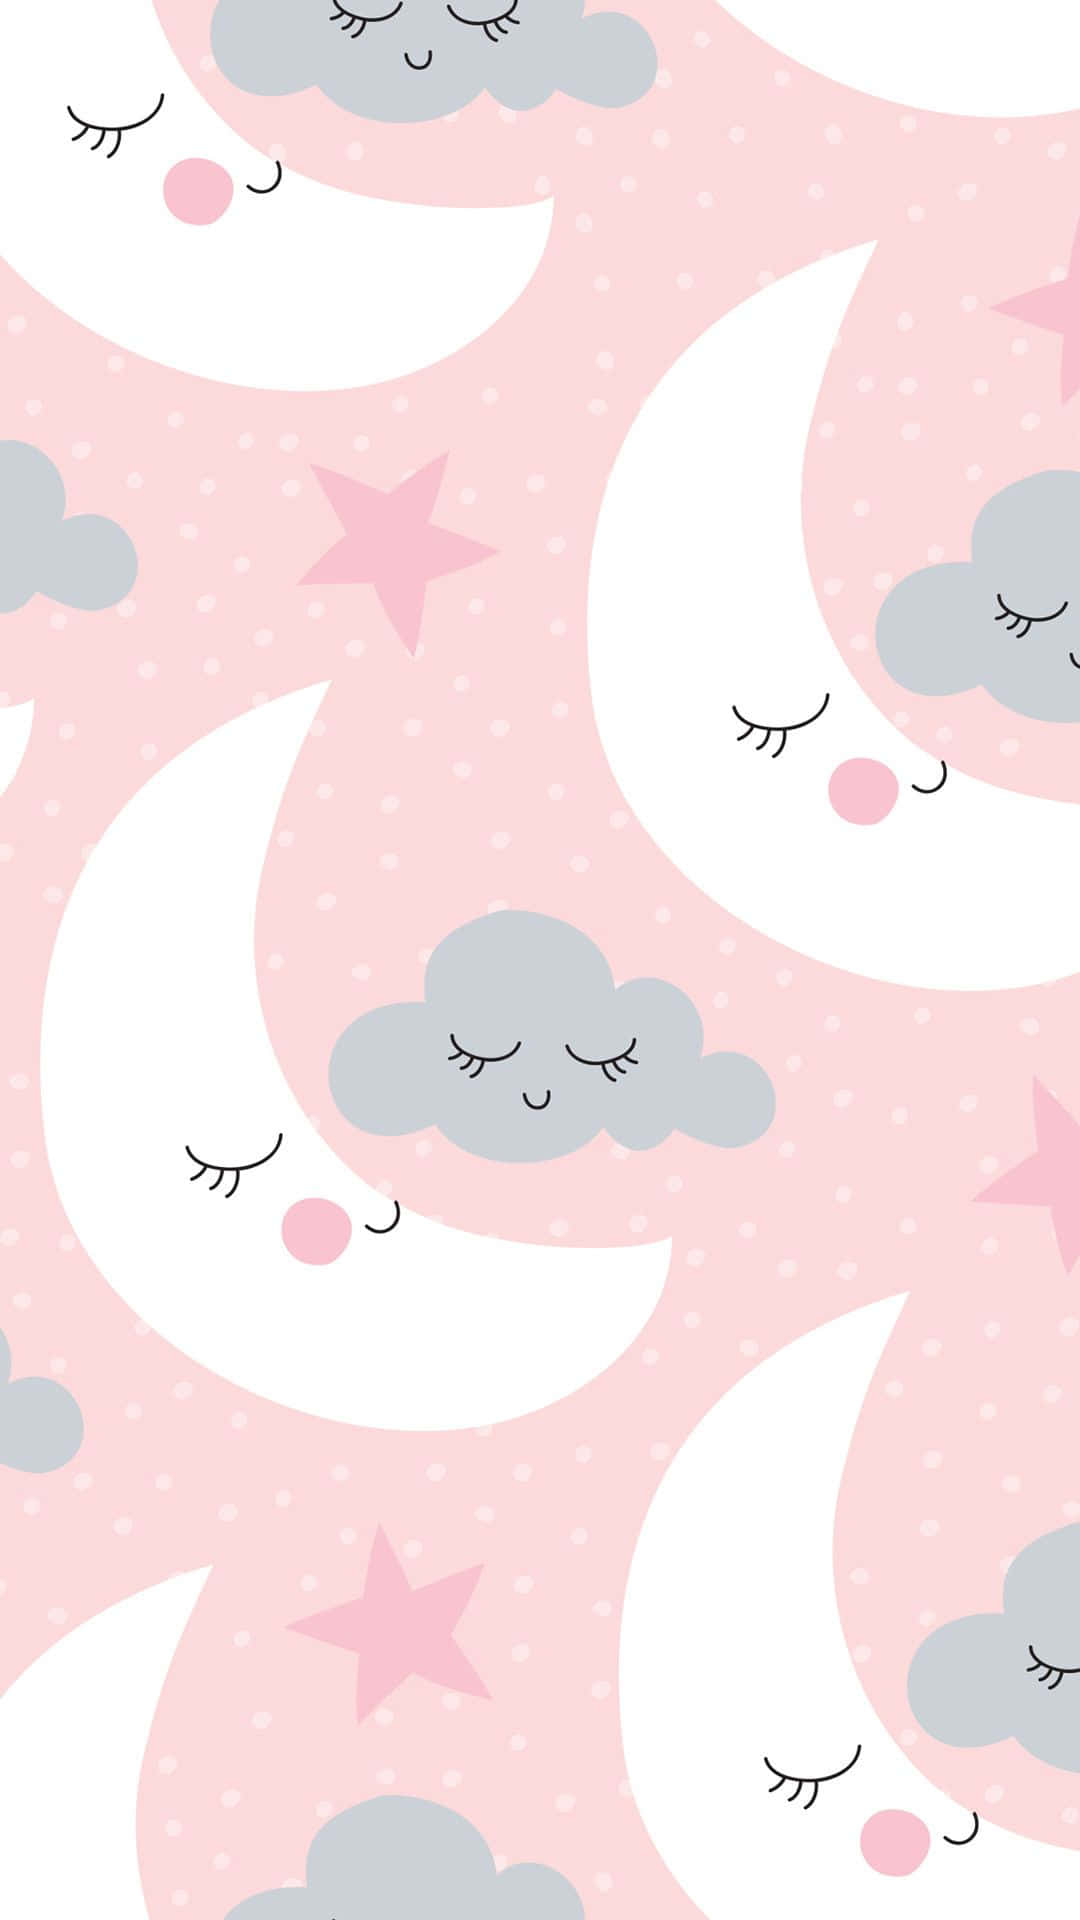 Clouds Moon With Face Girly Cute Picture